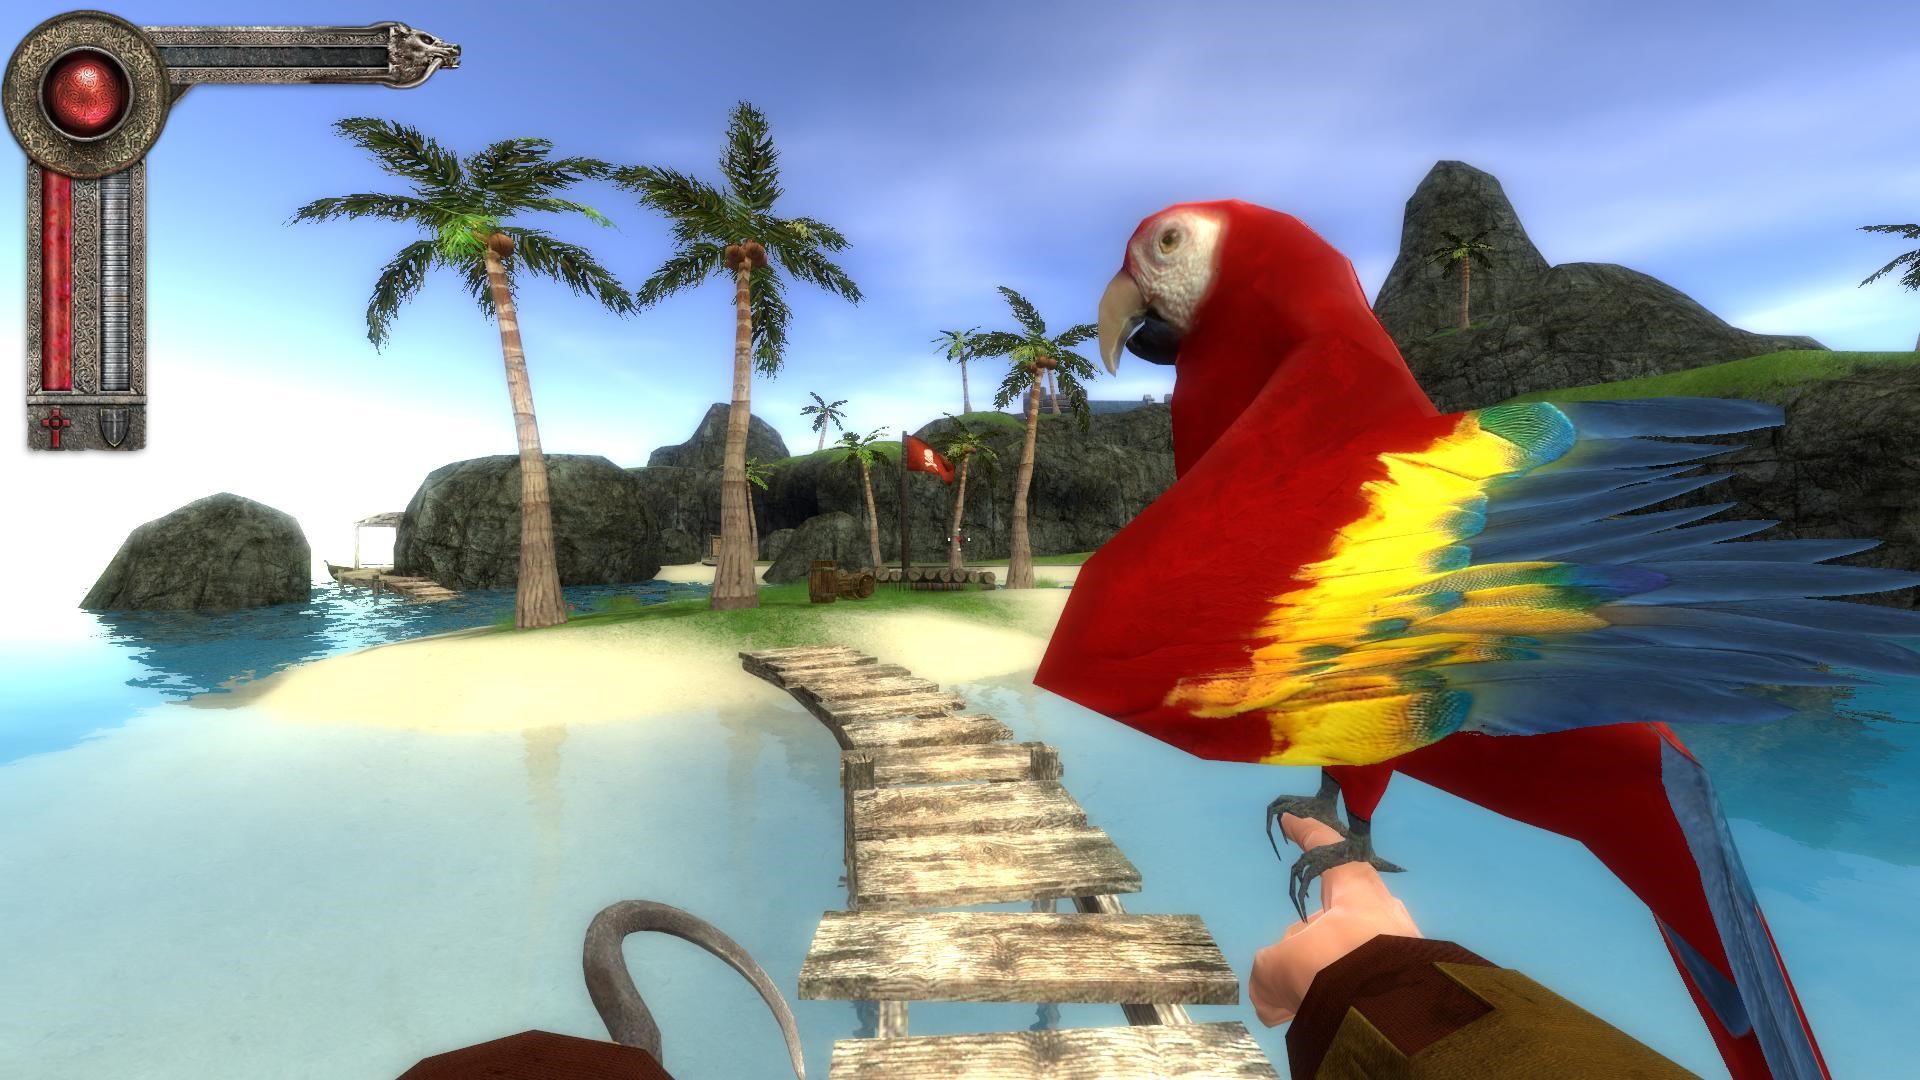 As a pirate captain, use your attack parrot to peck at your enemies!